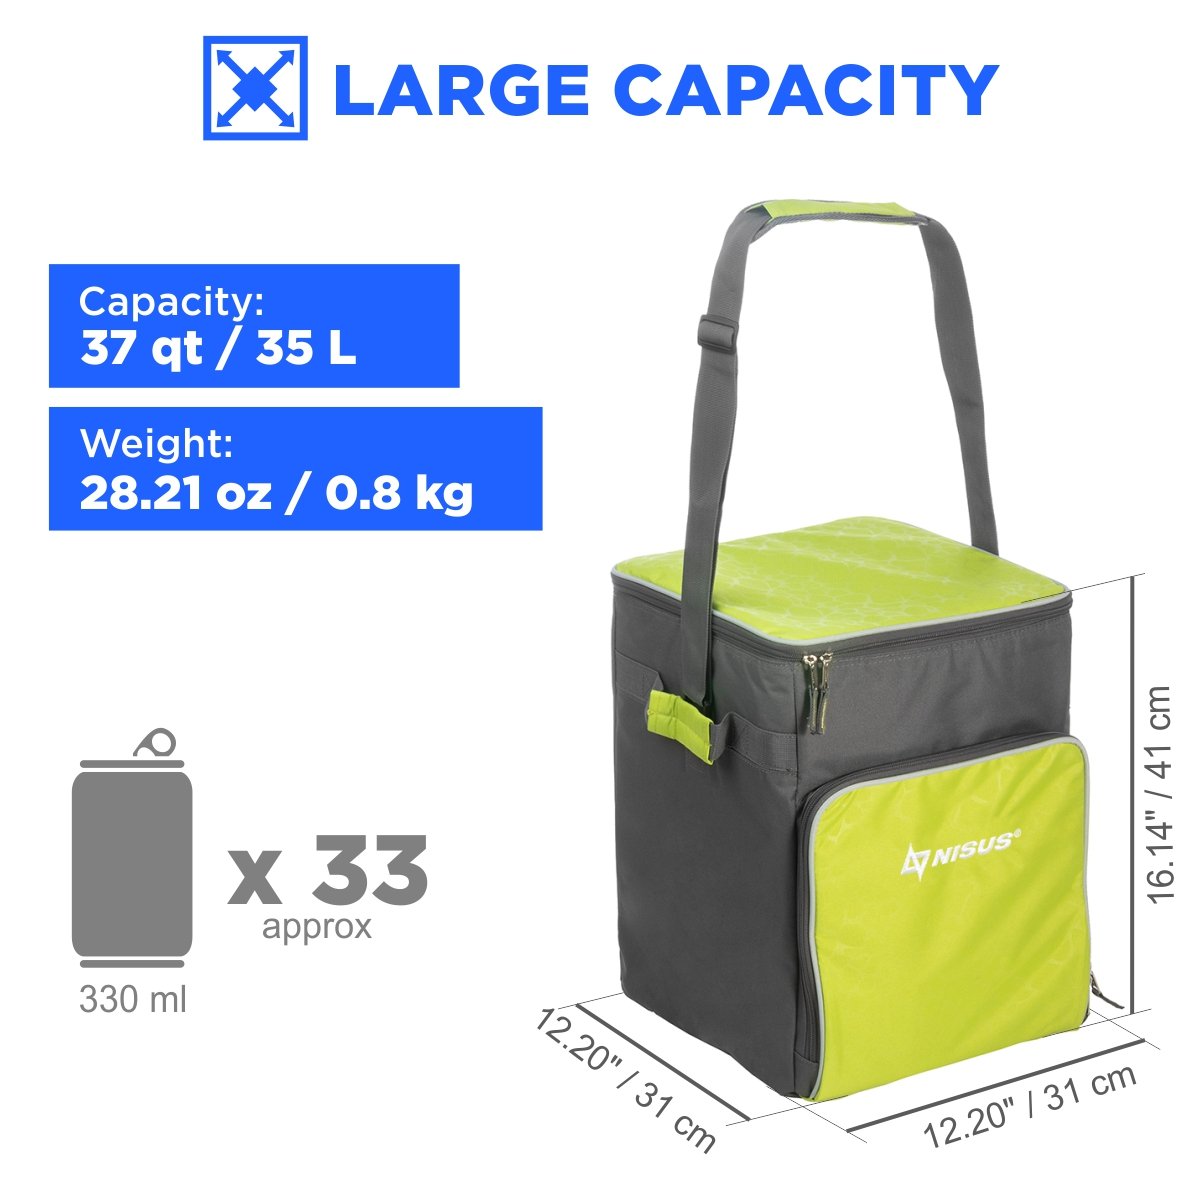 37 qt Beach Soft Sided Cooler Bag for 33 cans weighs 28 oz, it is 12.2 inches long, 12.2 inches wide and 16.1 inches high